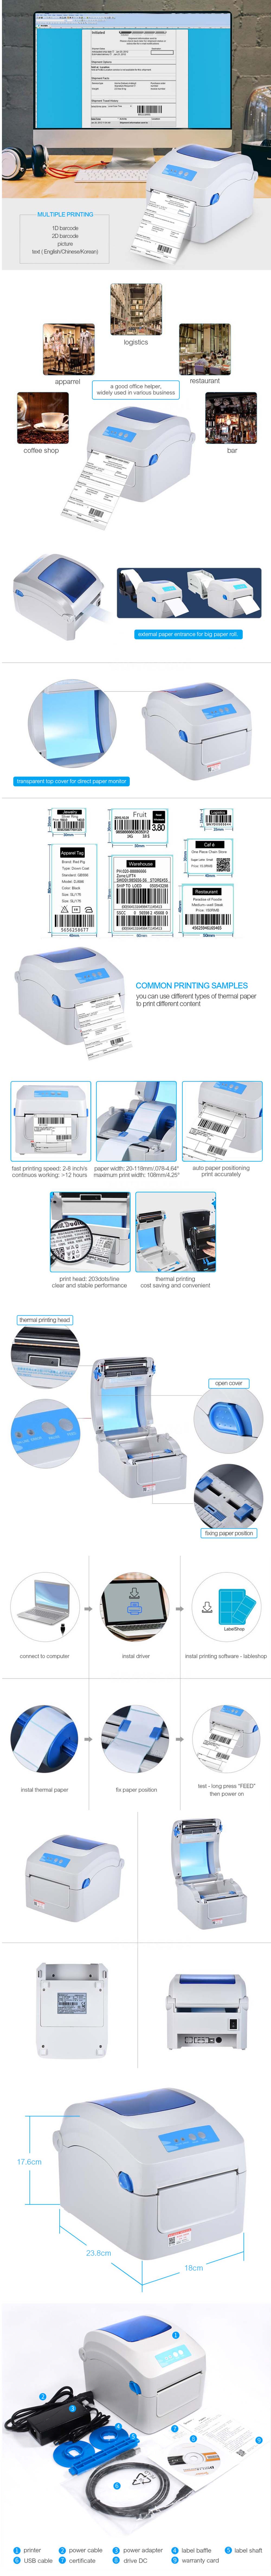 Barcode-Printer-Bluetooth-Clothing-Label-203dpi-Support-108mm-Width-Thermal-Printing-1357978